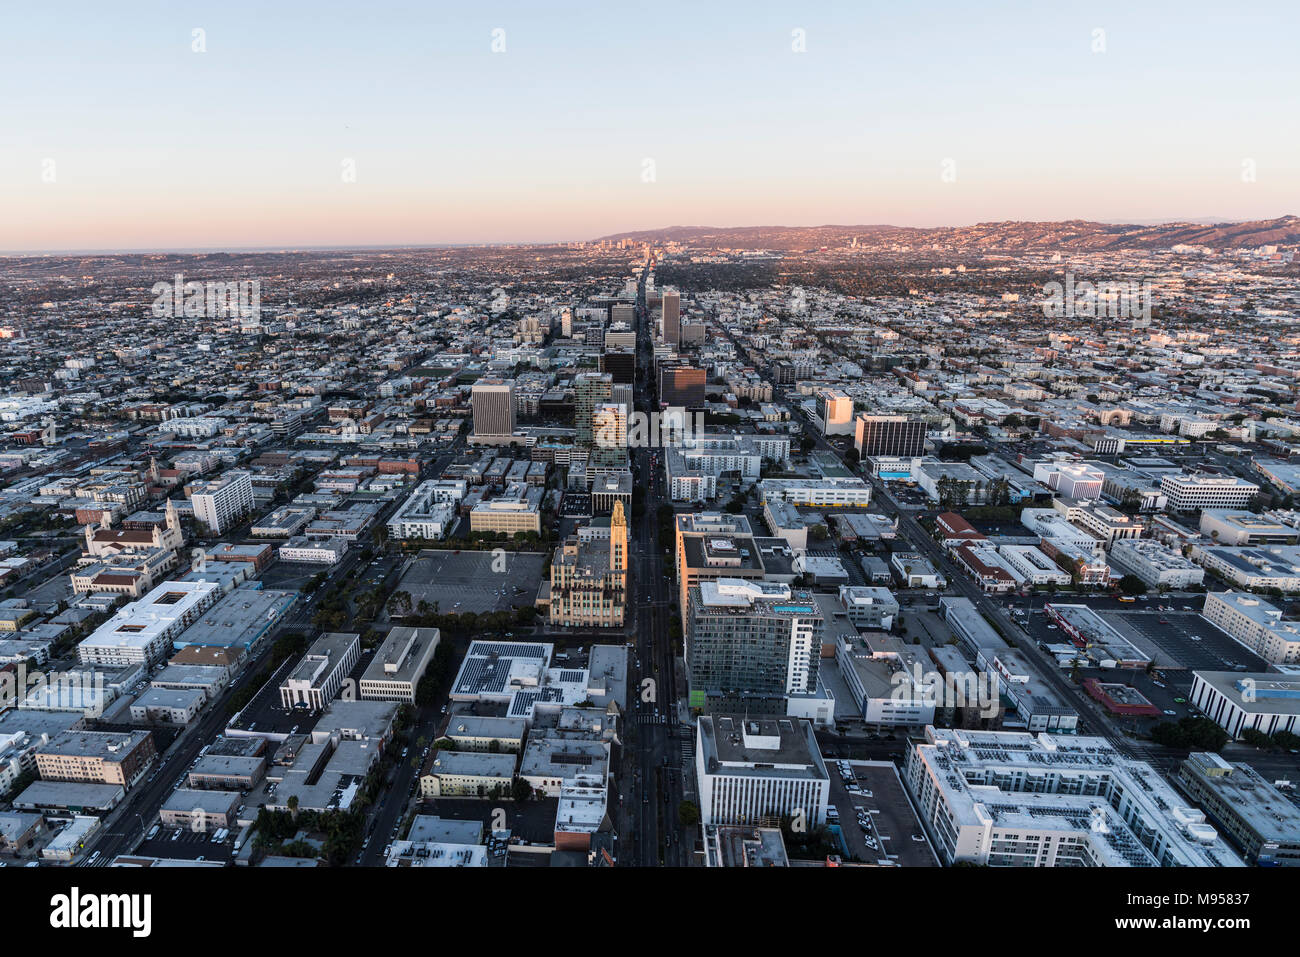 Los Angeles, California, USA - February 20, 2018:  Predawn aerial view of Wilshire Bl in the Korea Town neighborhood near downtown LA. Stock Photo